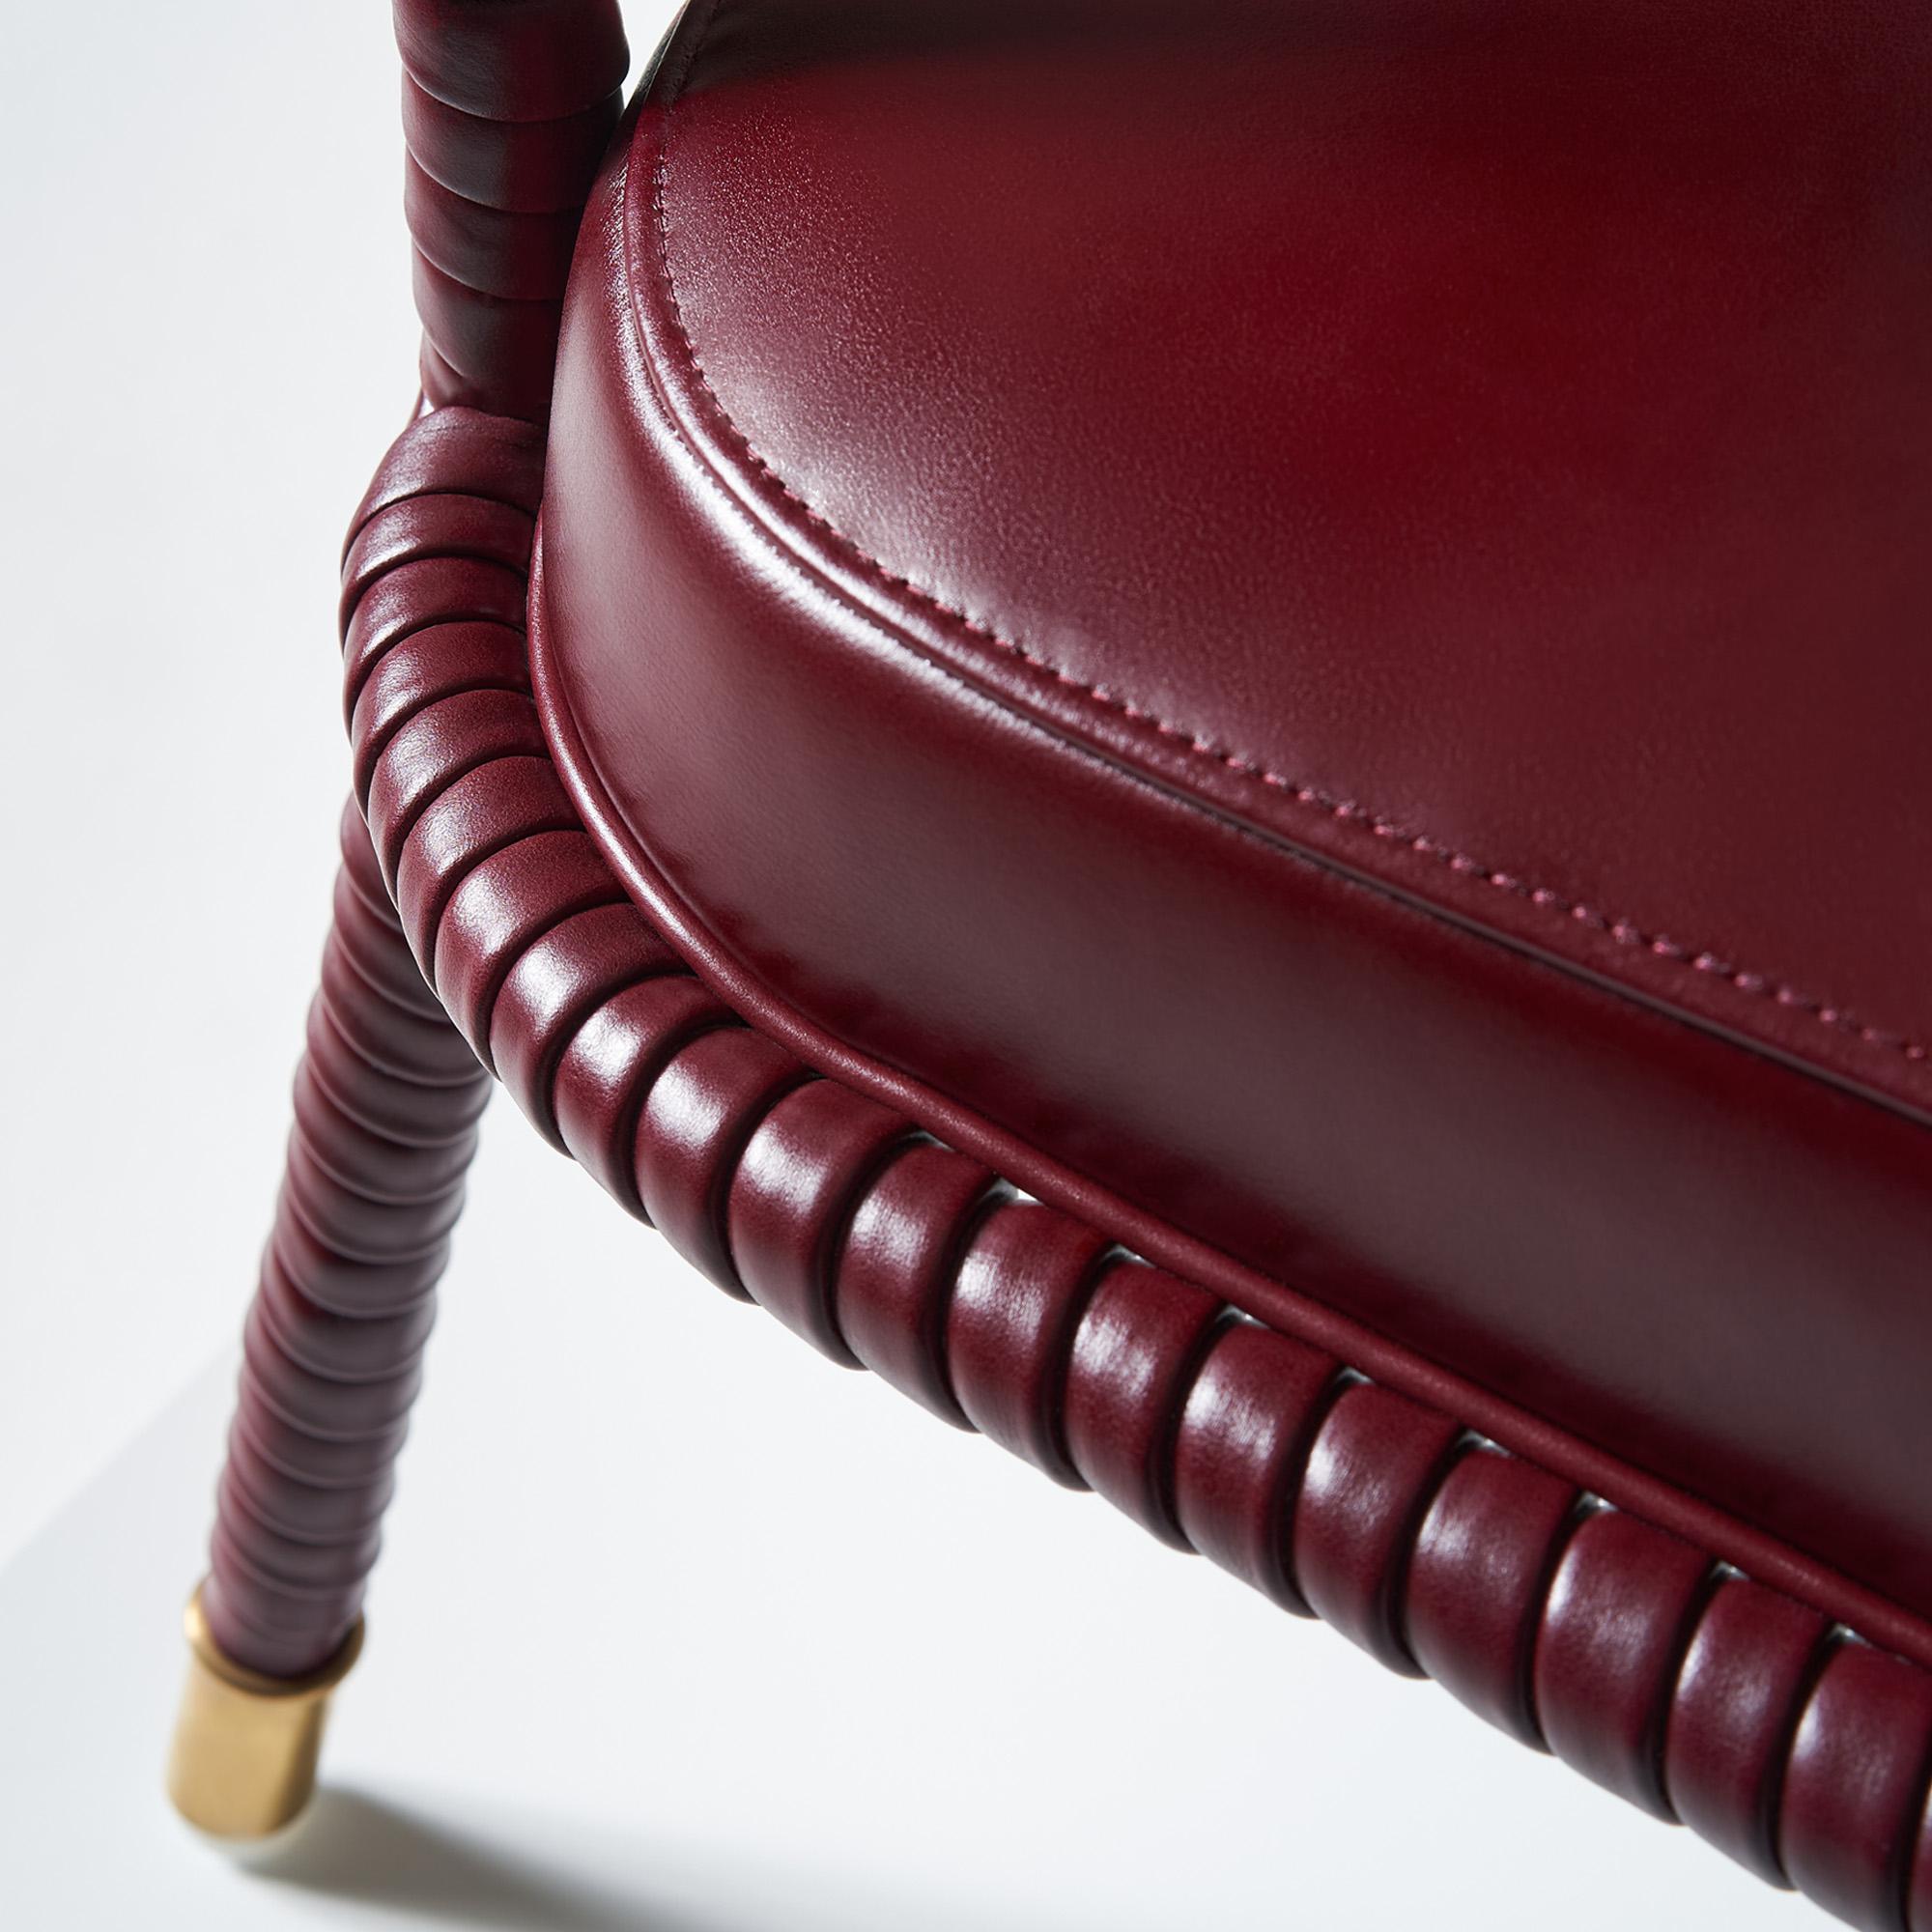 Easton Side Chair, Fully Wrapped Upholstered Leather in Red Colour In New Condition For Sale In London, GB